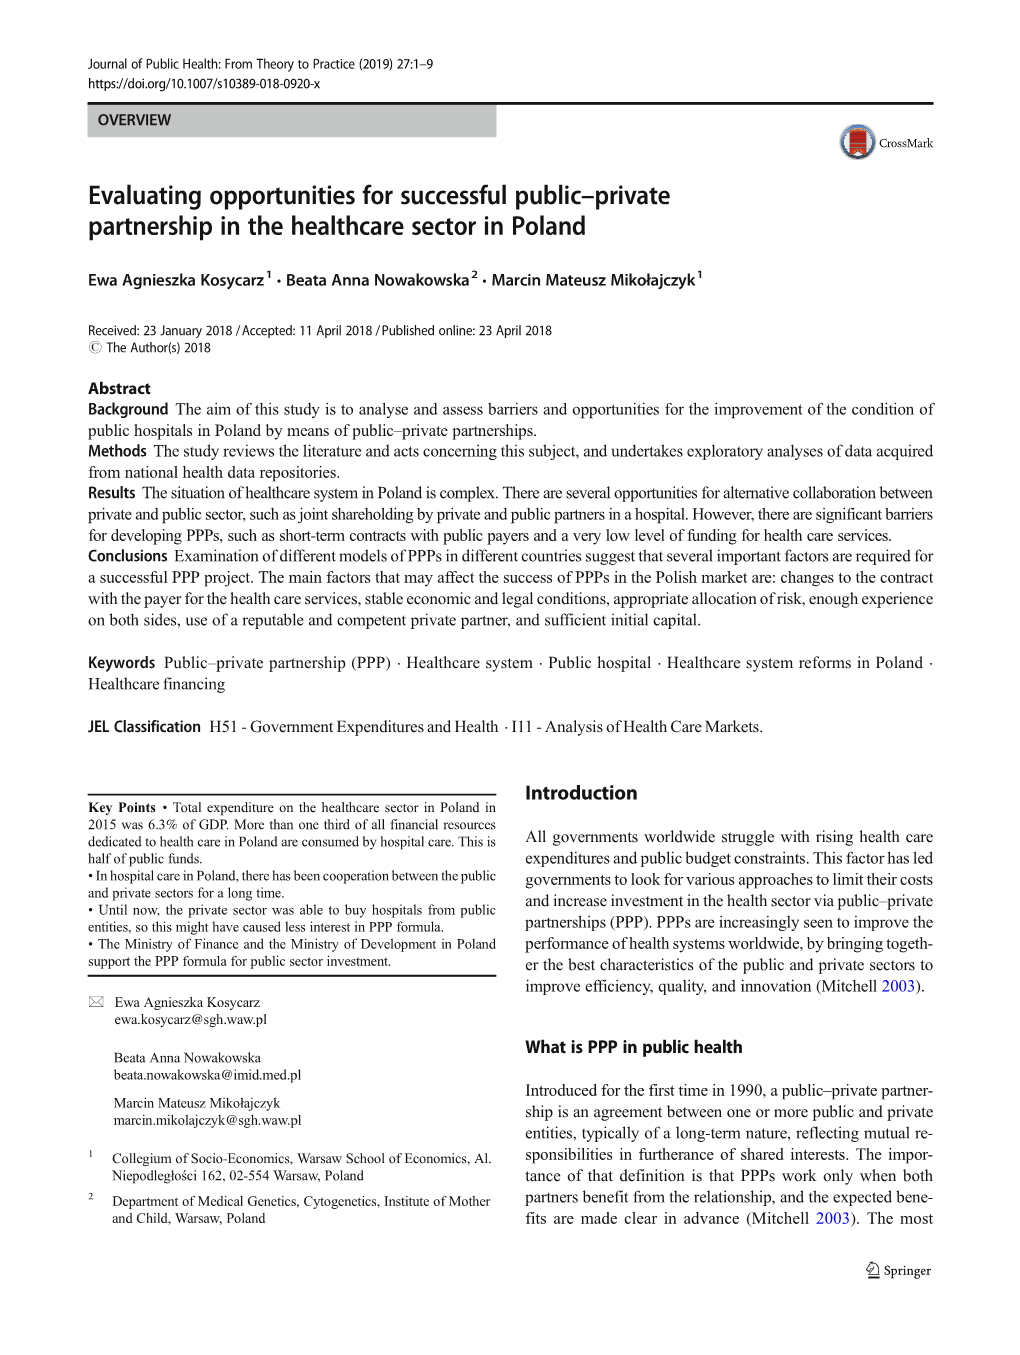 Evaluating Opportunities for Successful Public–Private Partnership in the Healthcare Sector in Poland